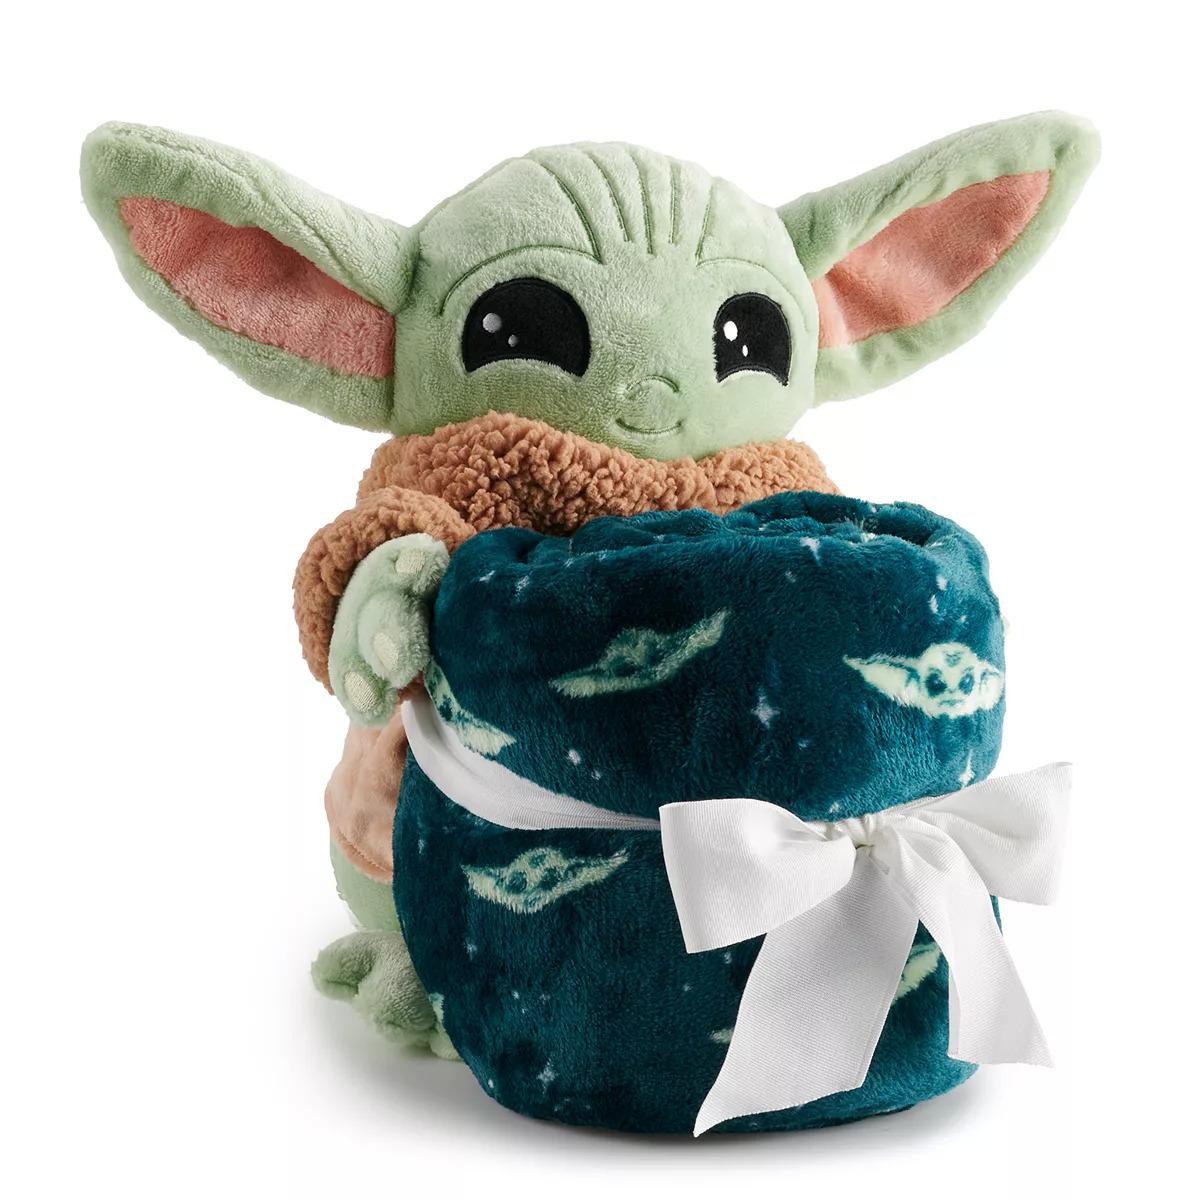 The Big One Kids Plush Buddy and Throw Blanket Set for $11.99